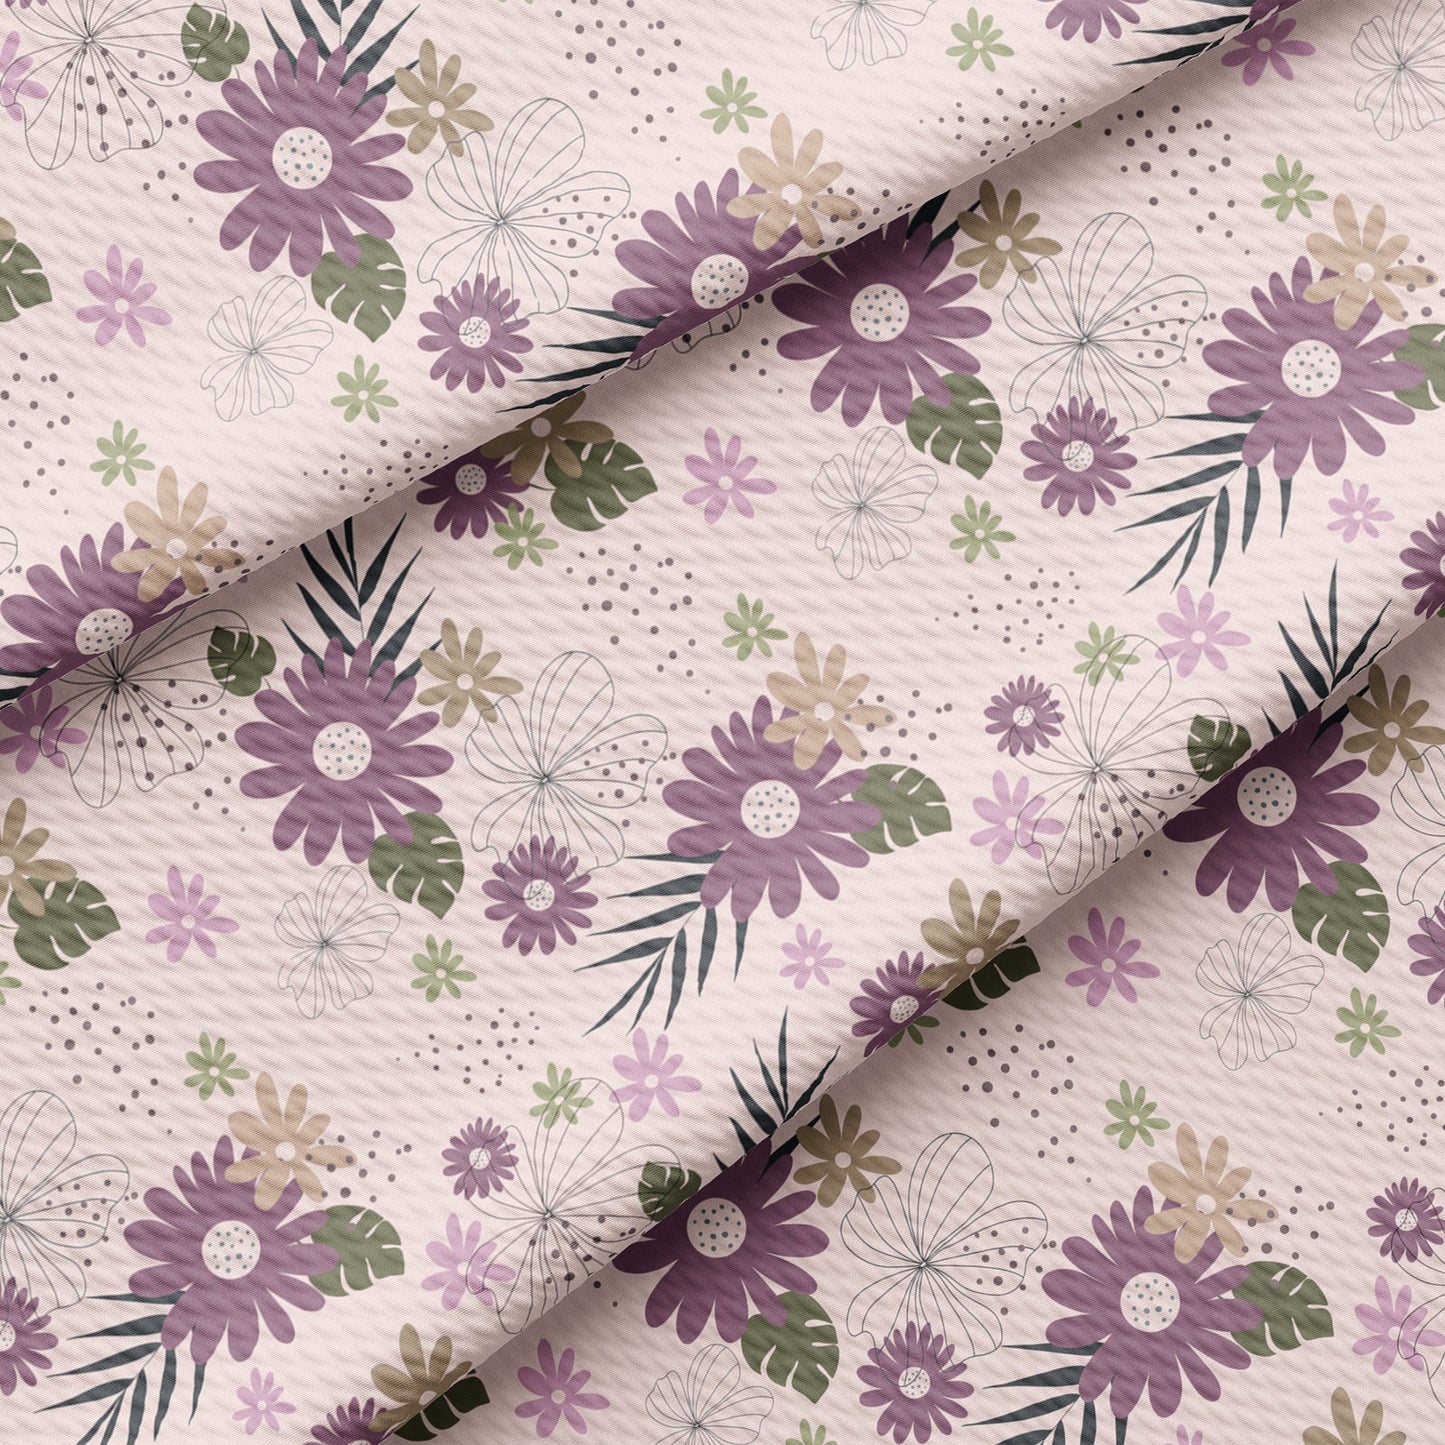 Floral l Bullet Textured Fabric by the yard AA1636